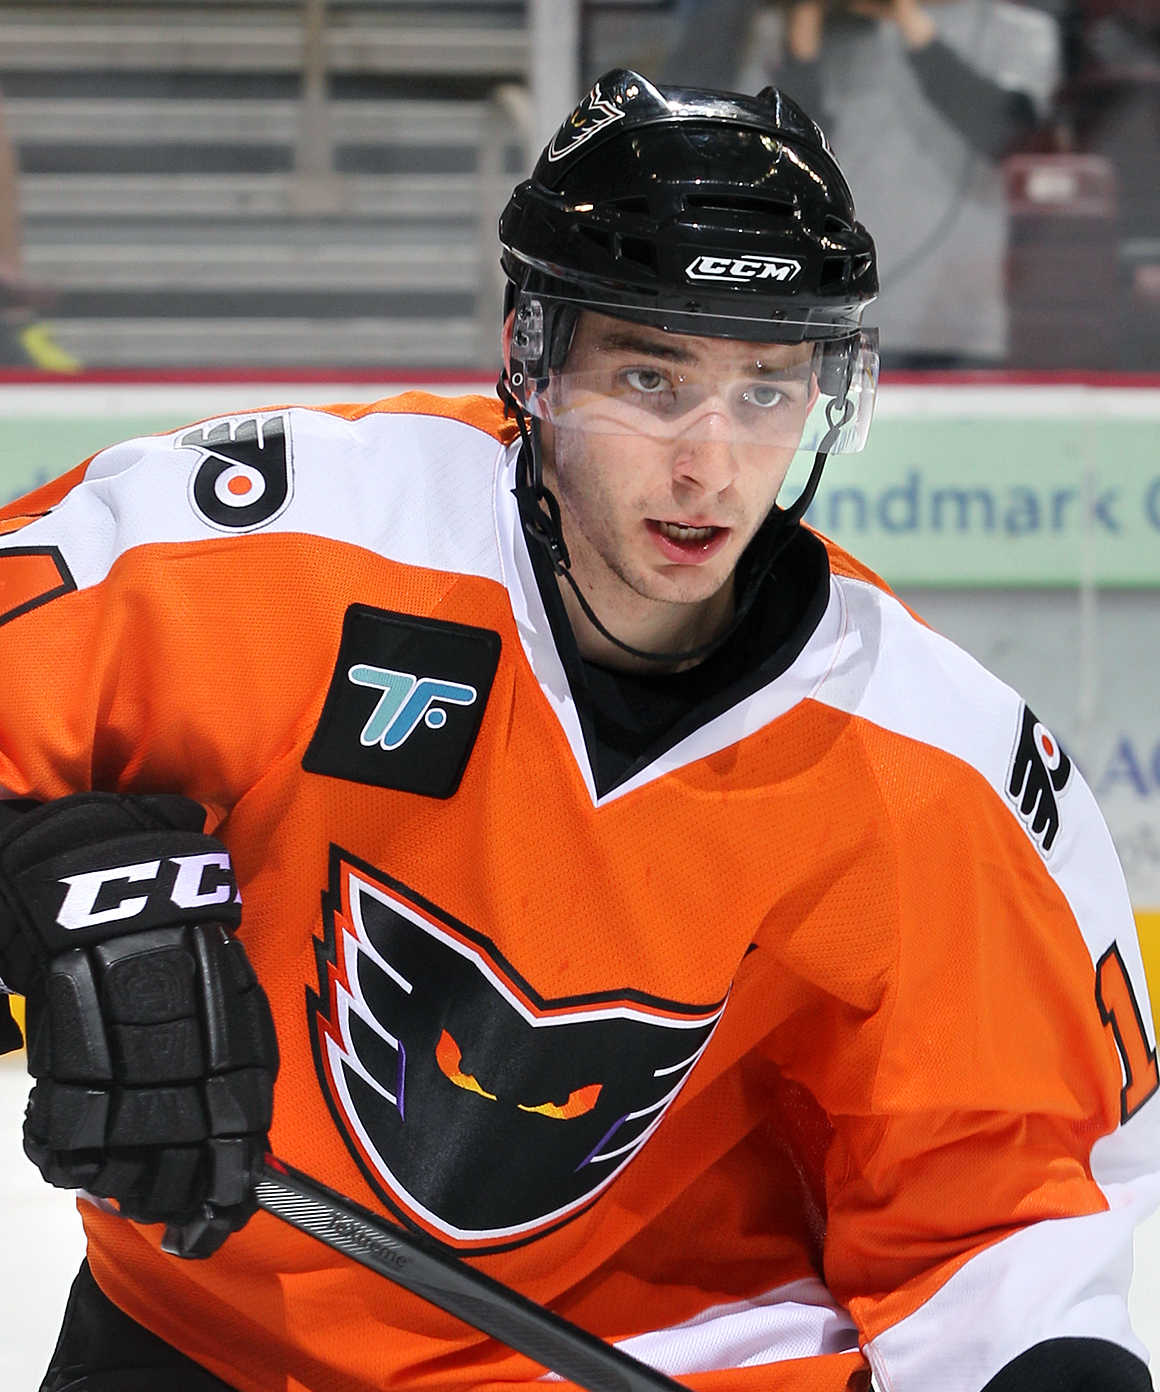 New-look Flyers sign Lecavalier to multi-year deal